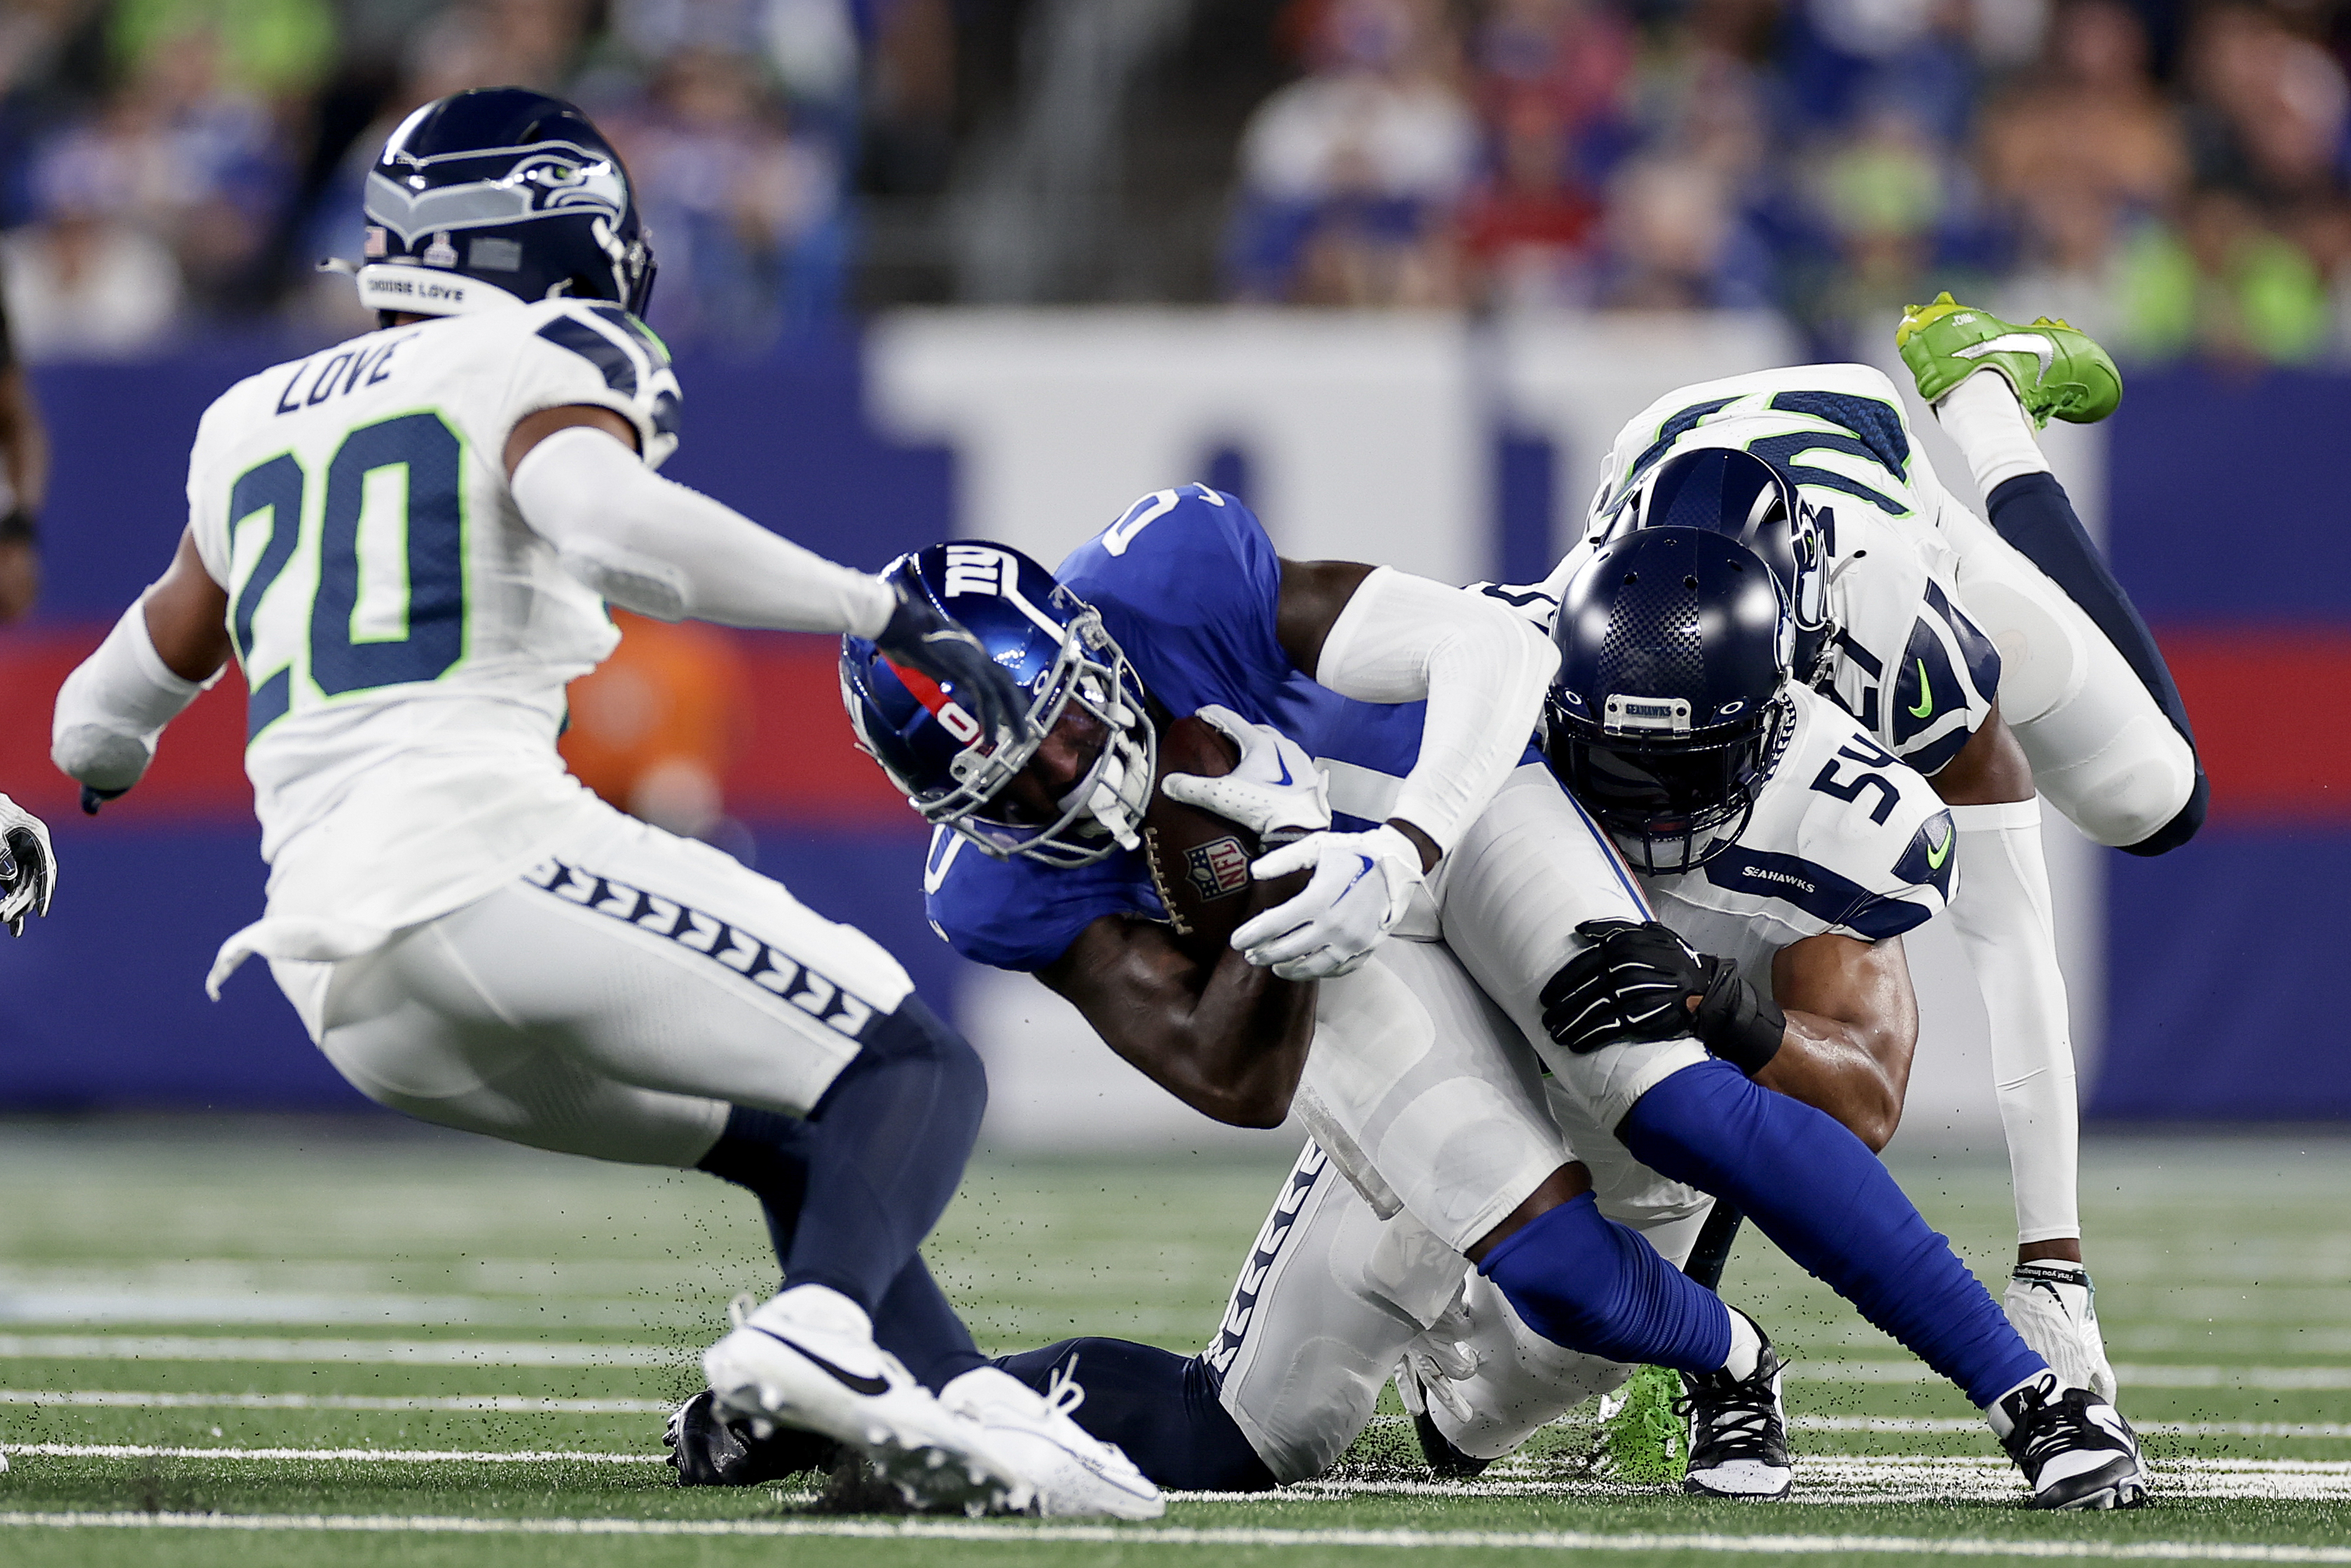 Witherspoon scores on 97-yard pick six, Seahawks beat Giants